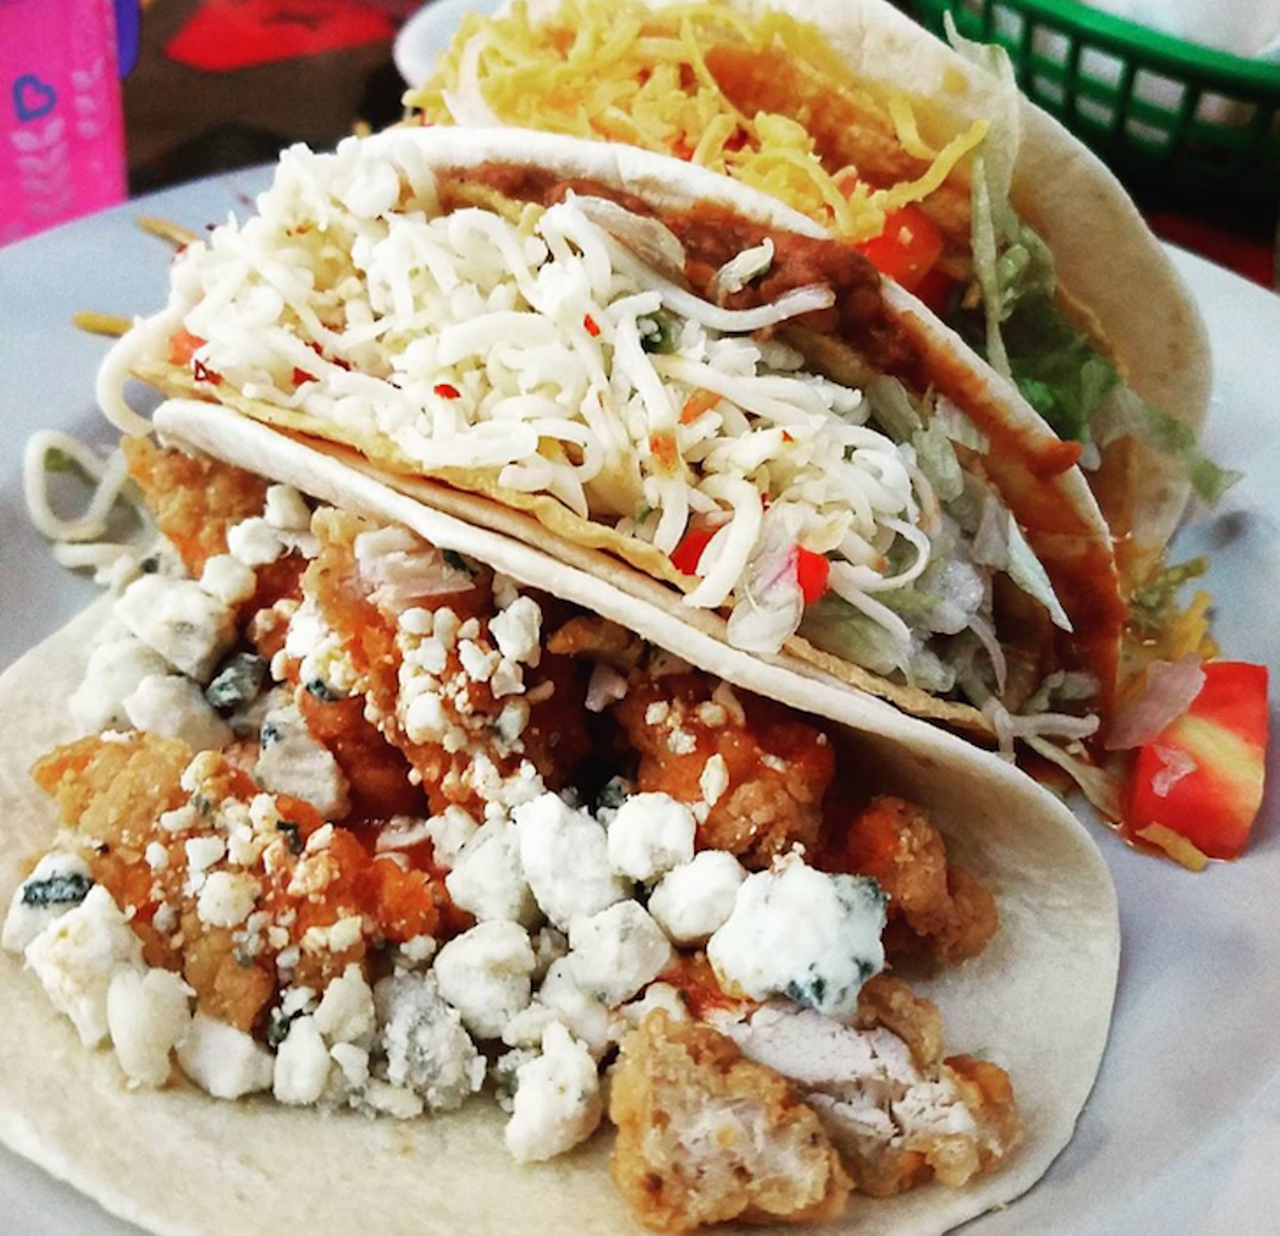  PR&#146;s Taco Palace
717 W Smith St, Orlando, (407) 440-2803
The tacos at PR&#146;s Taco Palace tacos can be a little bit on the pricer side, but on Tuesdays, you can get the two tacos for $6.
Photo via earthdock/Instagram